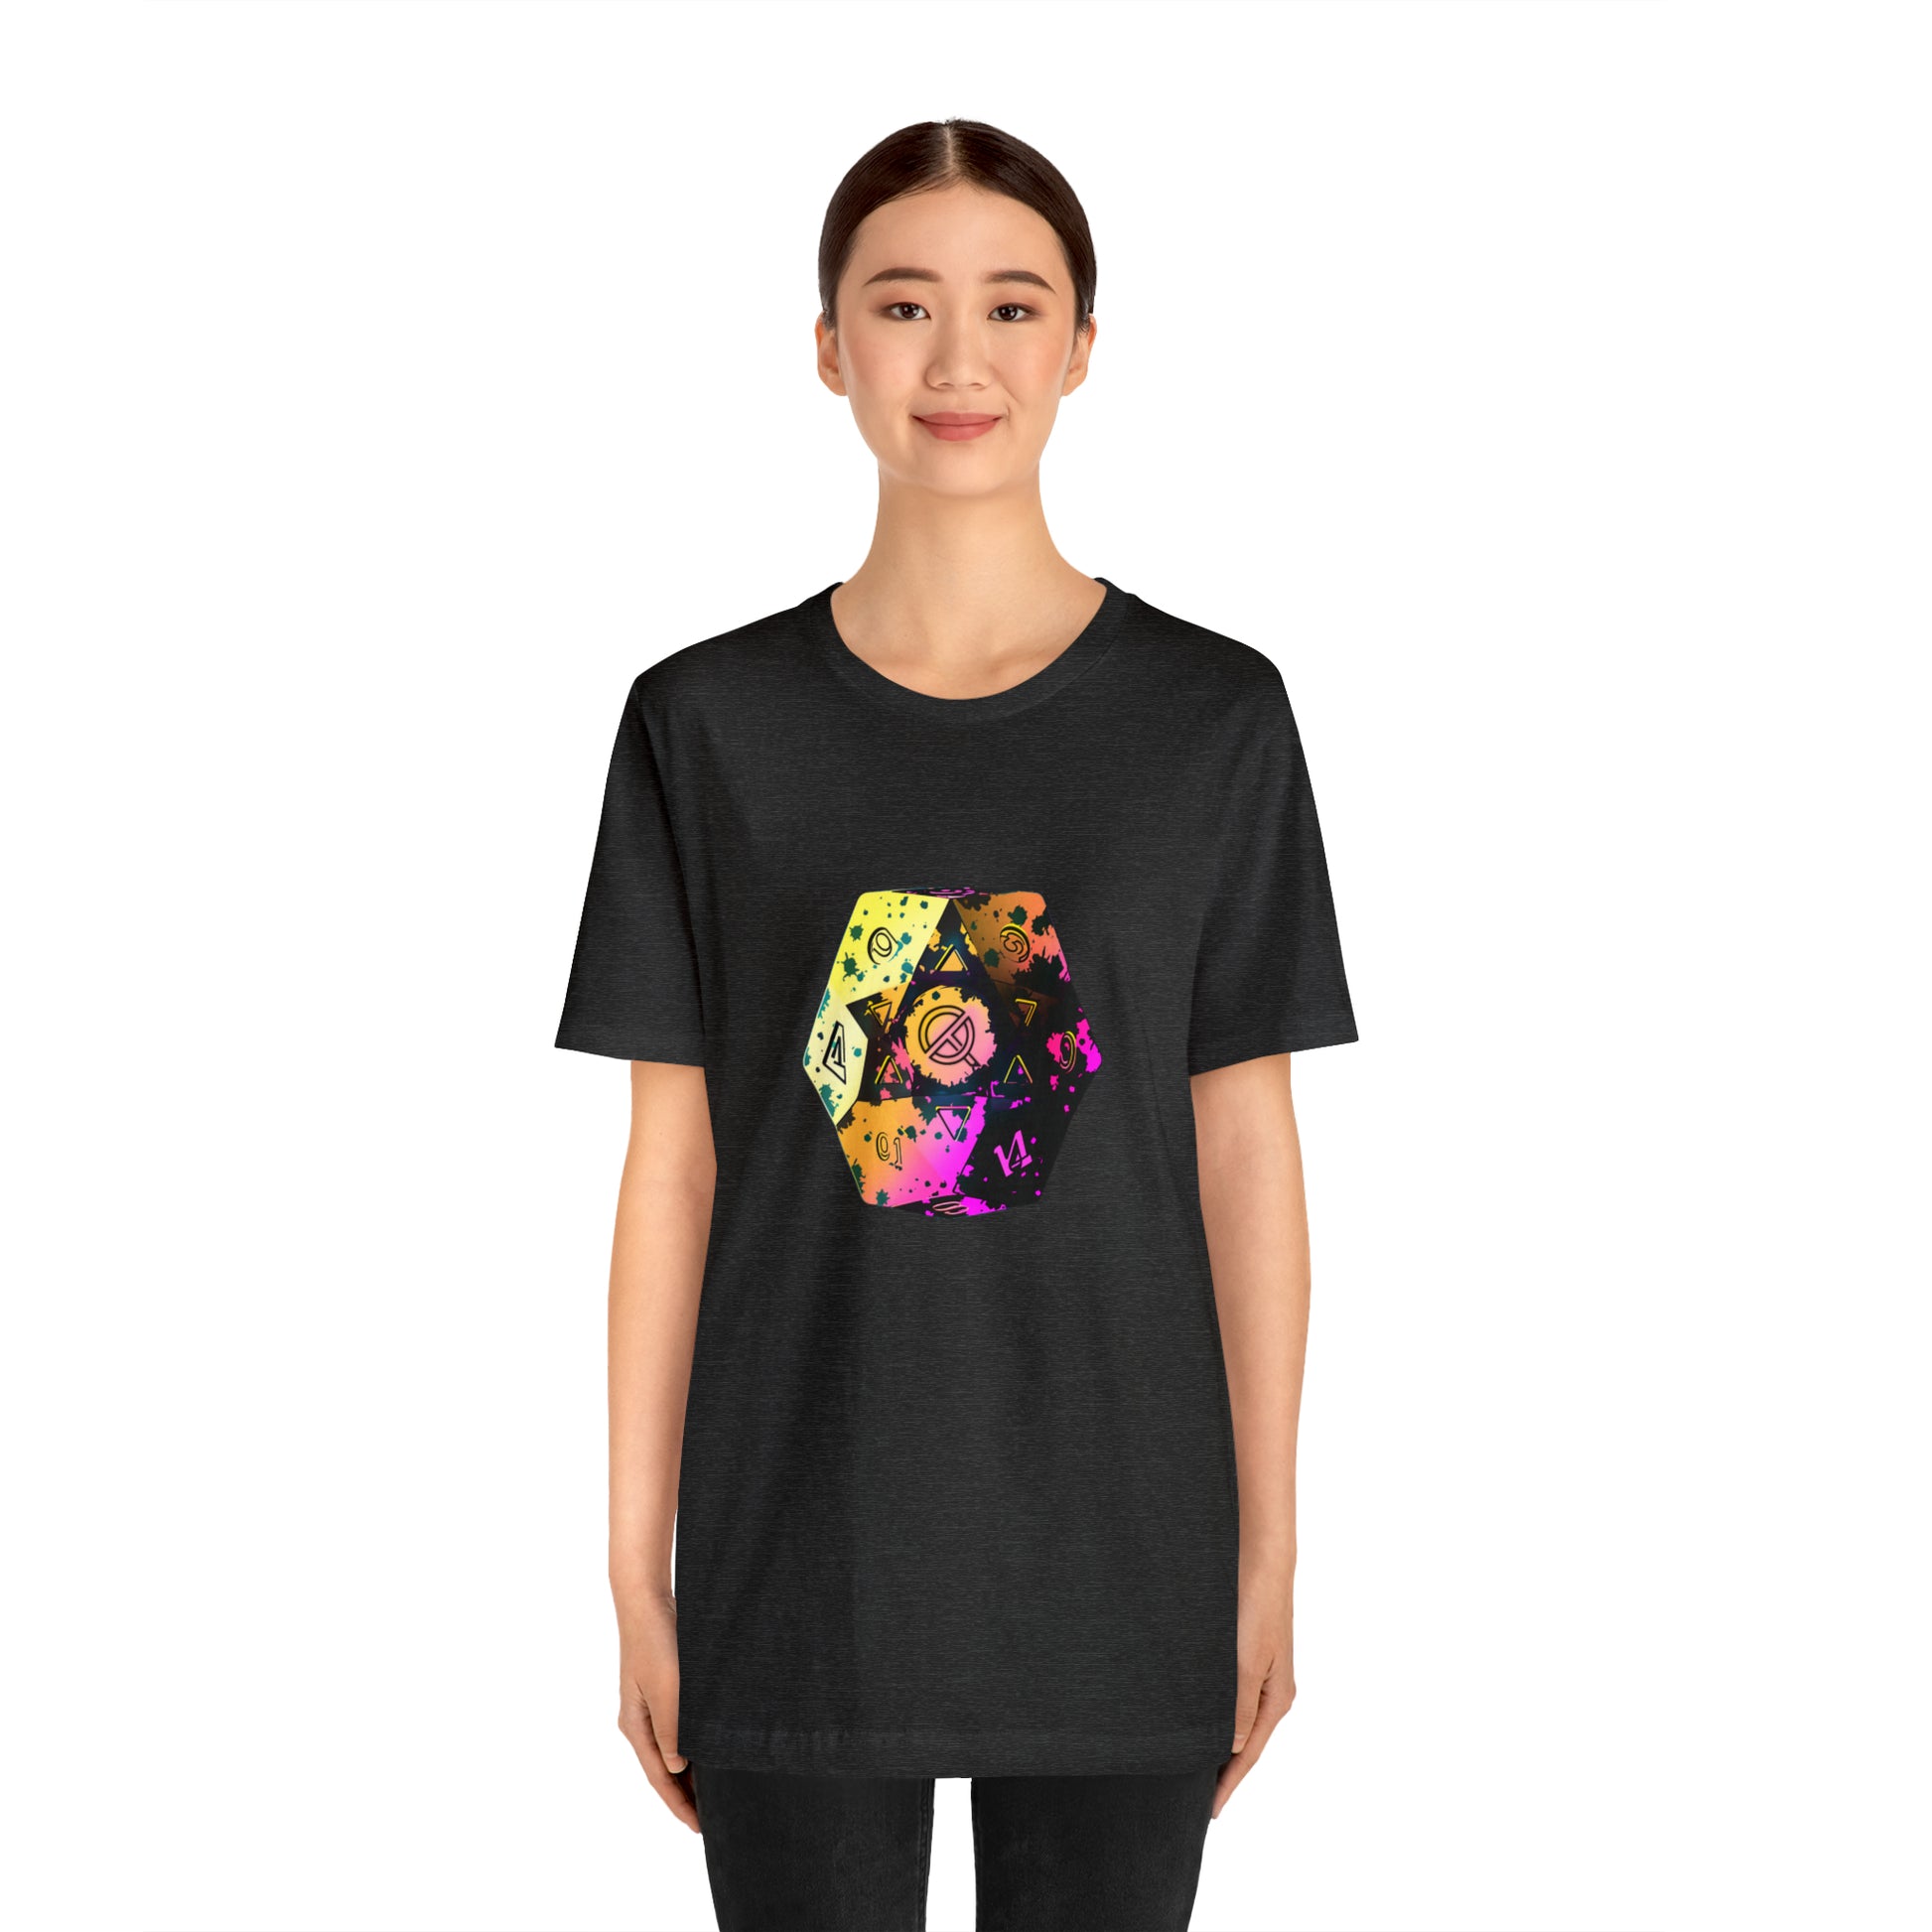 dark-grey-heather-quest-thread-tee-shirt-with-large-neon-d20-dice-on-center